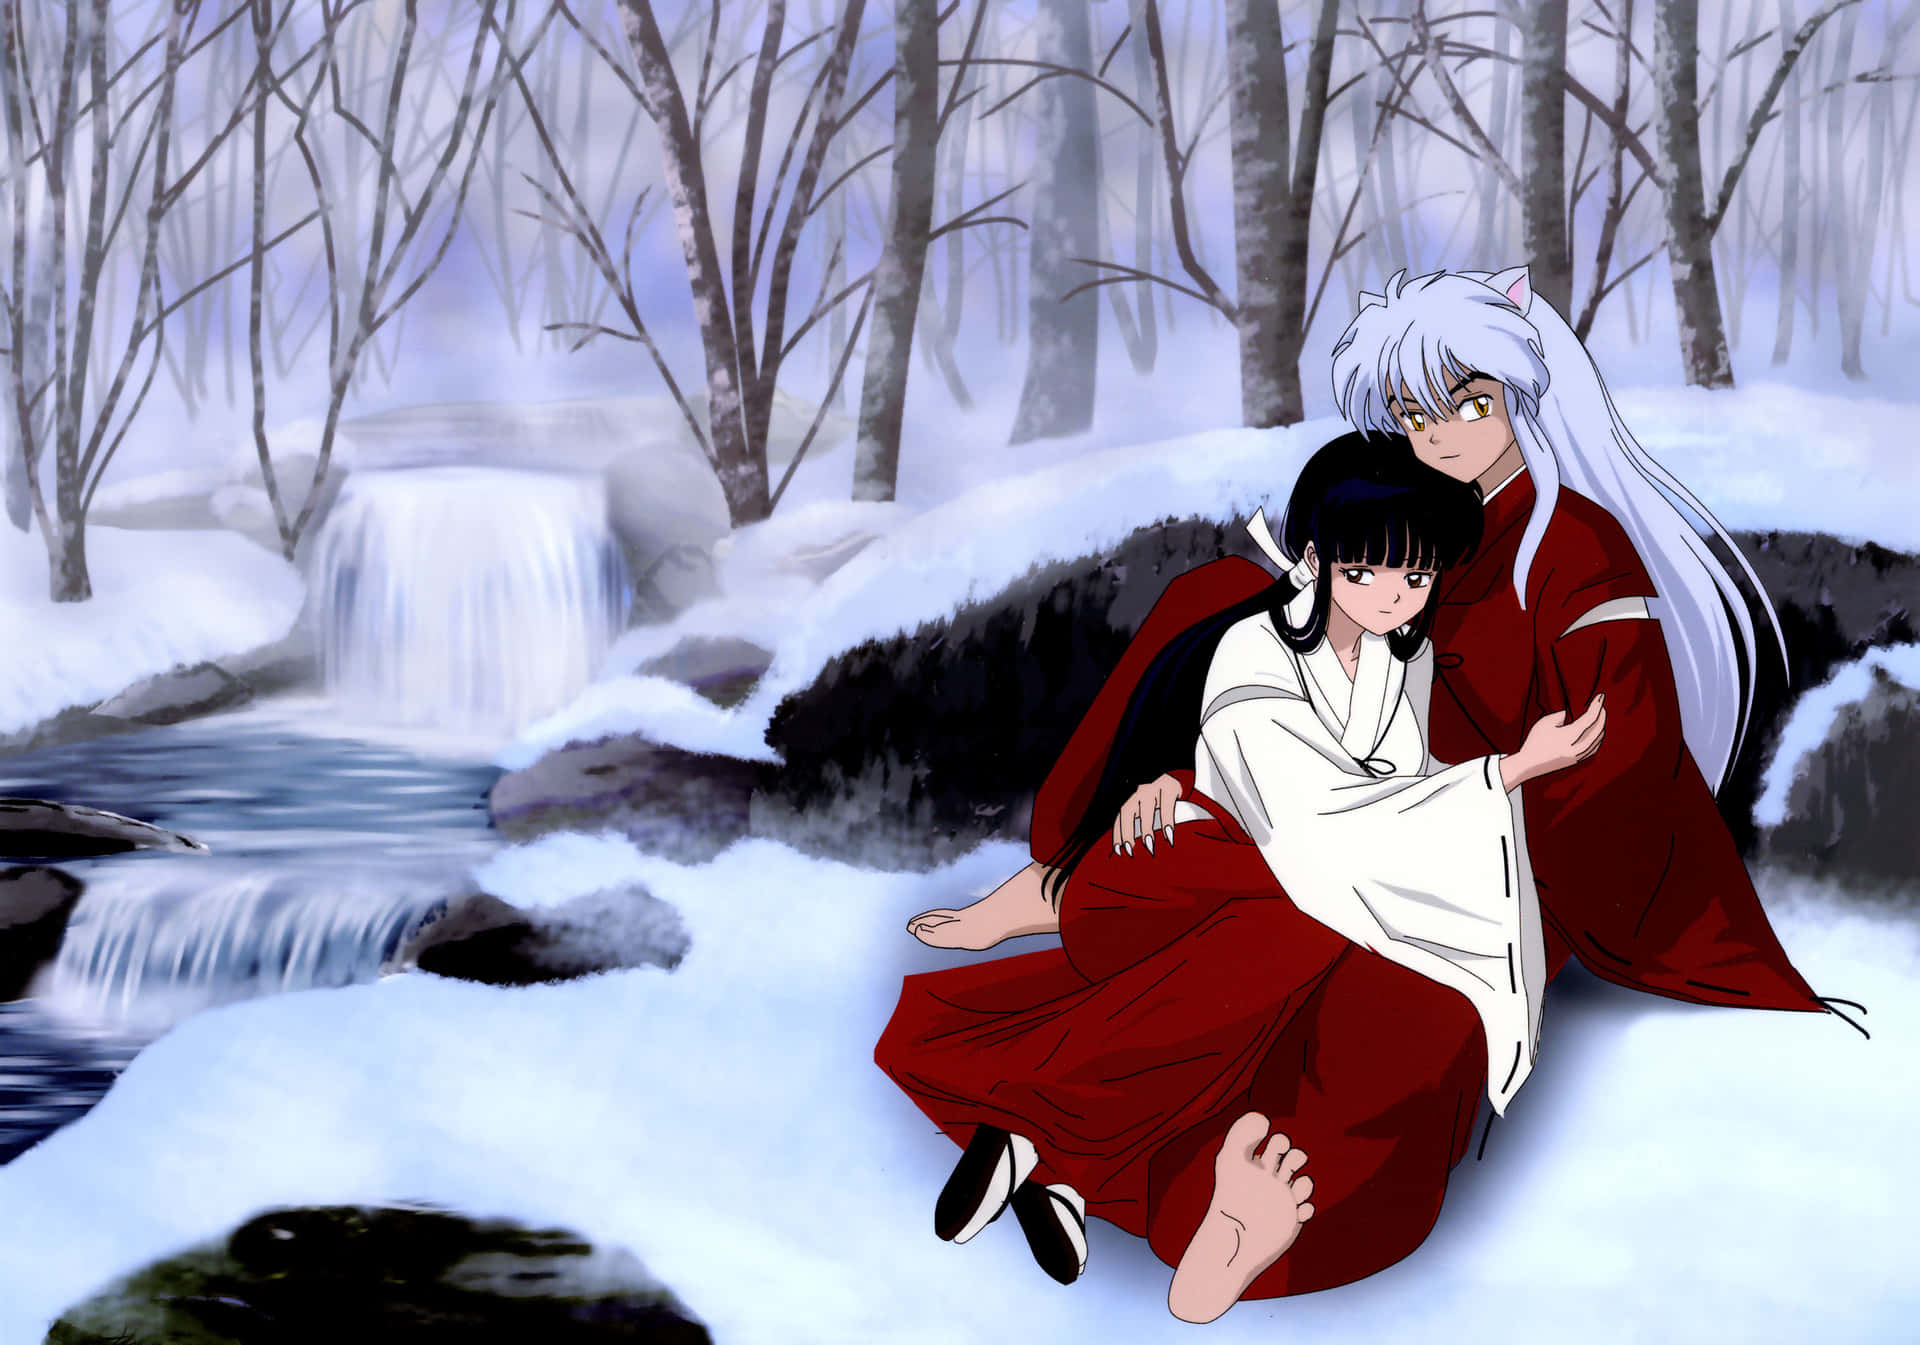 A Couple Sitting On A Snowy Hill In The Snow